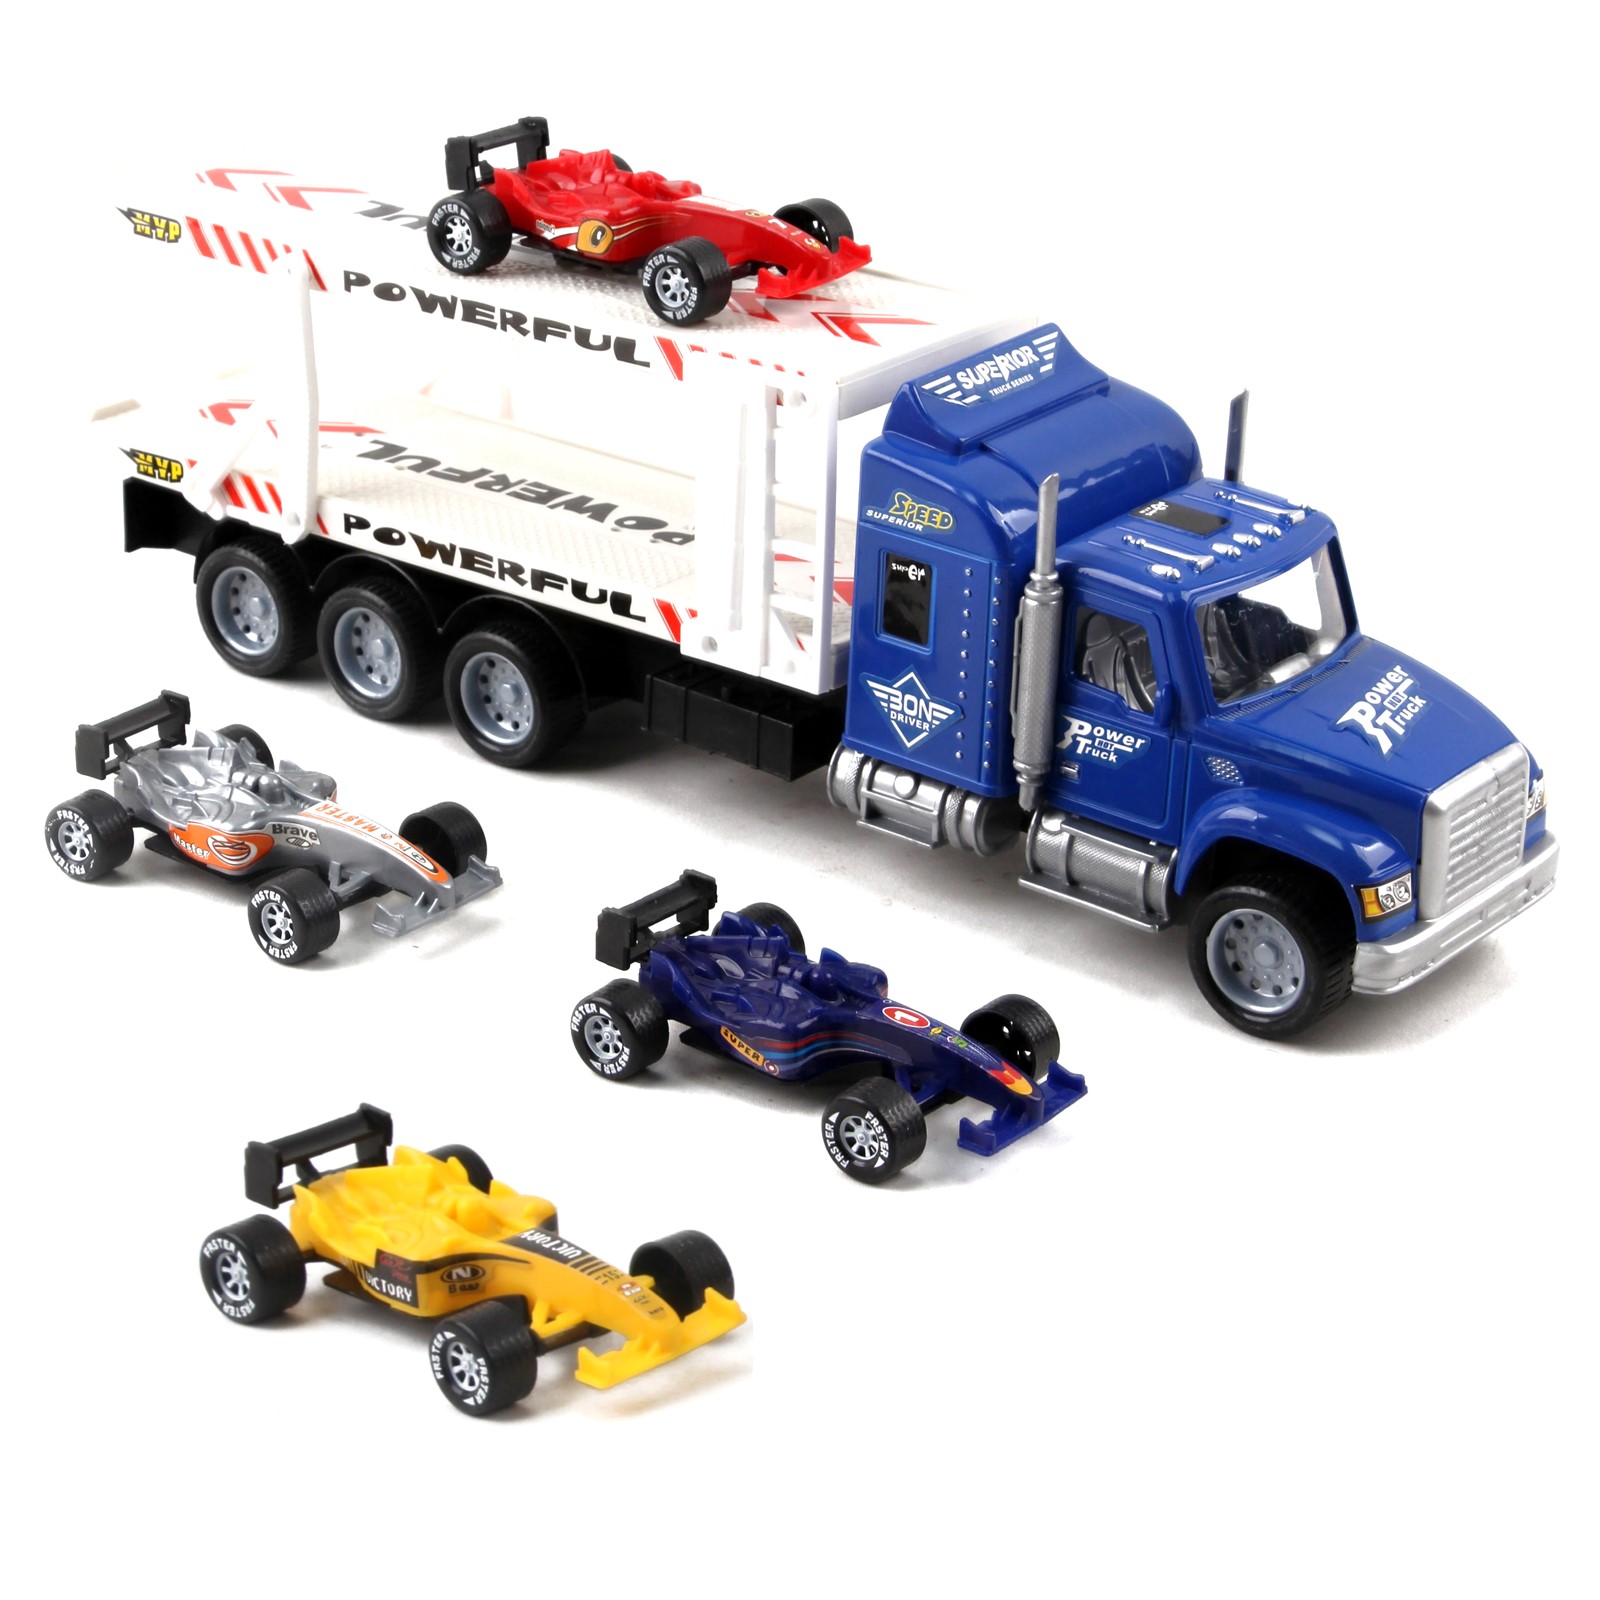 Friction Powered Toy Semi Truck Trailer 14.5" With Four Formula 1 Race Cars Kids Push And Go Big Rig Carrier 1:32 Scale Auto Transporter Semi-Truck Play Vehicle Great Gift For Children Boy Girl